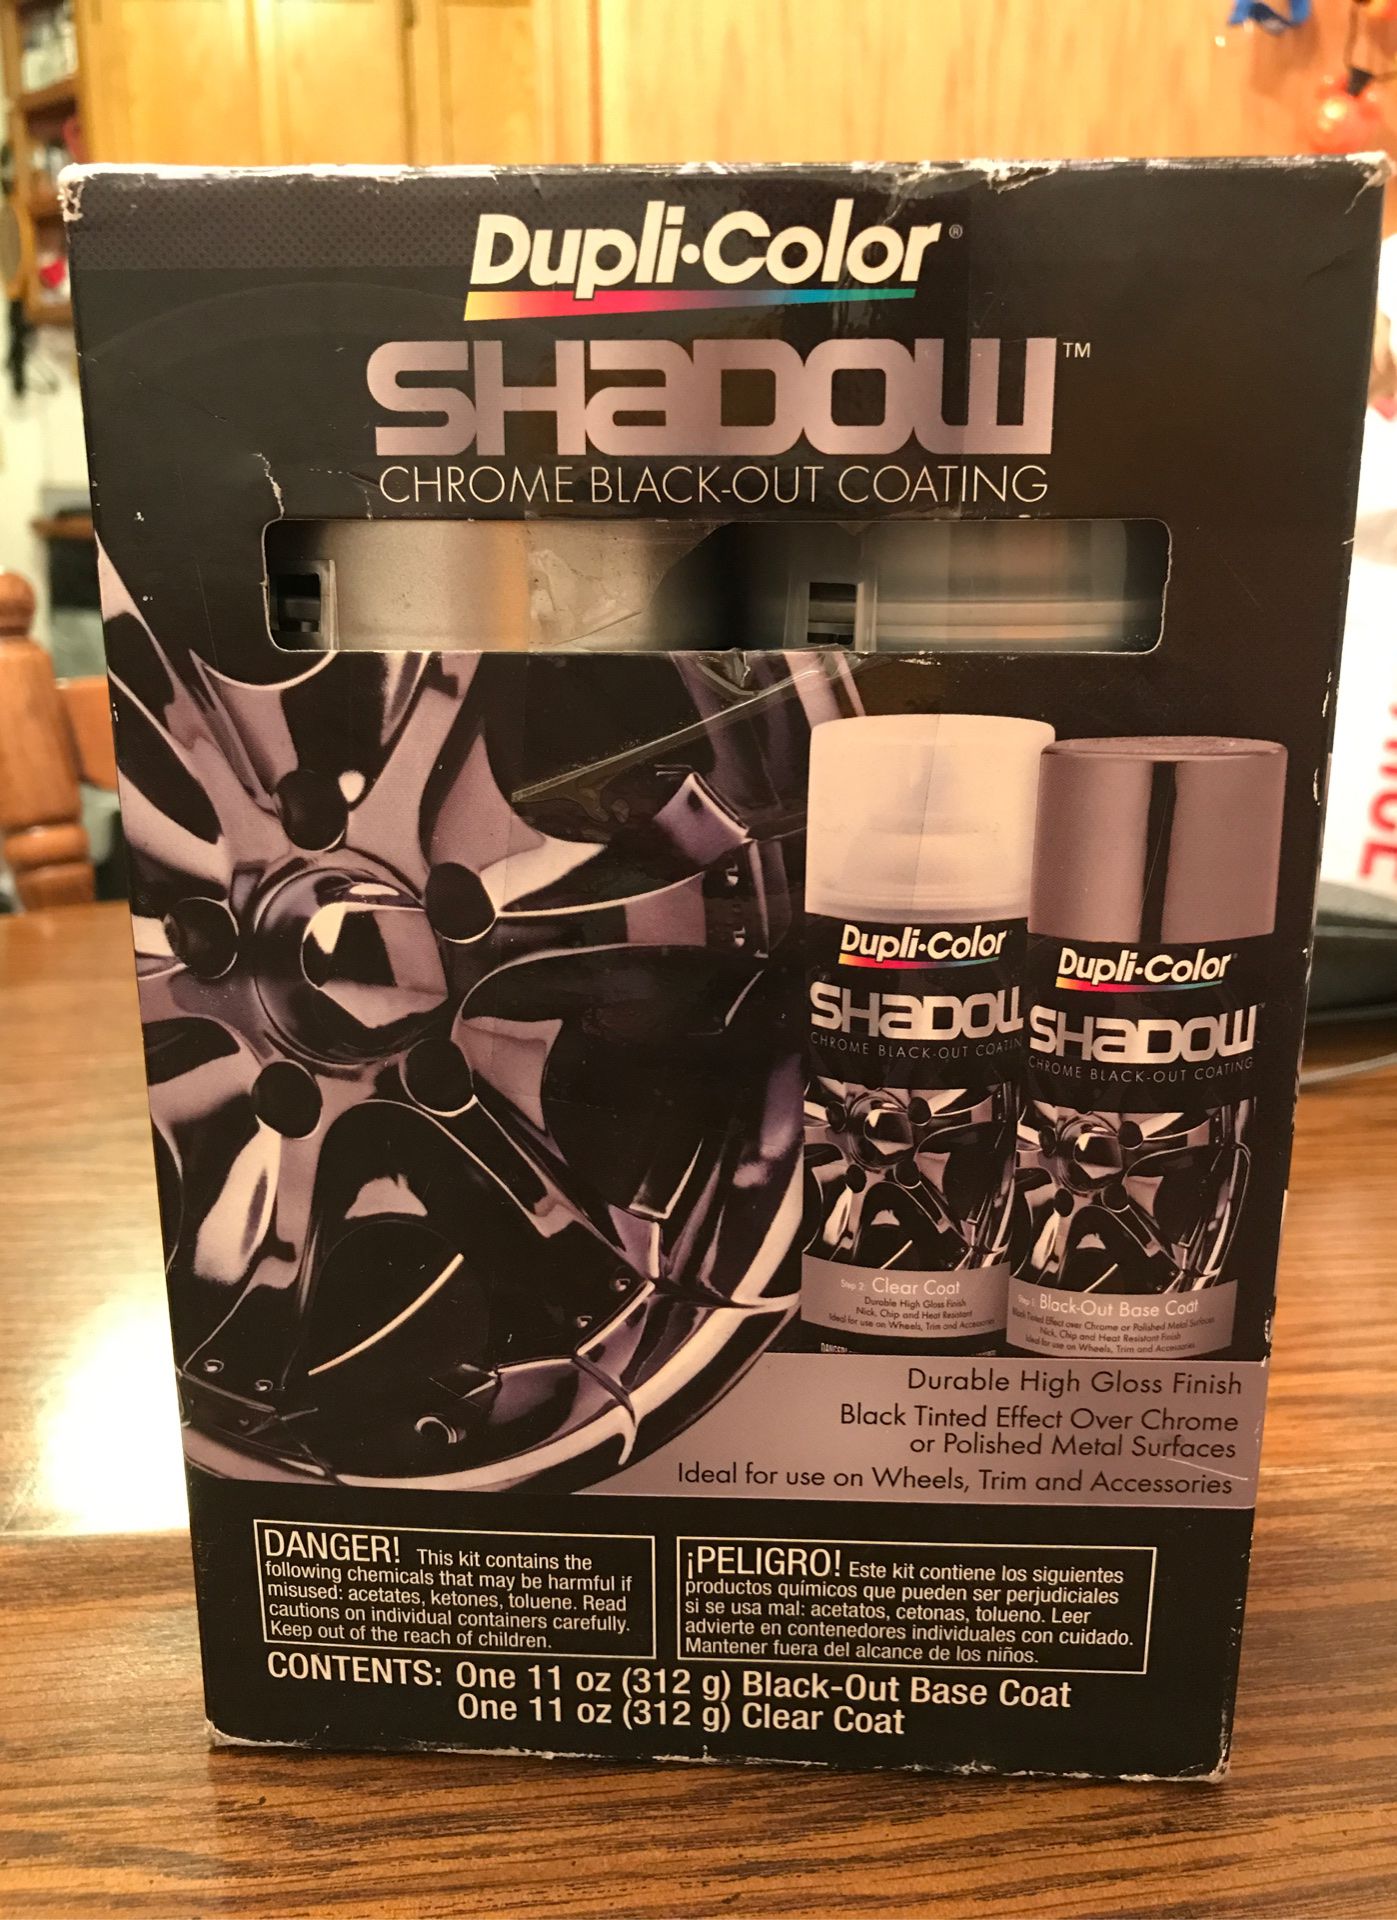 Dupli-color Shadow Chrome Black-out coating for rims